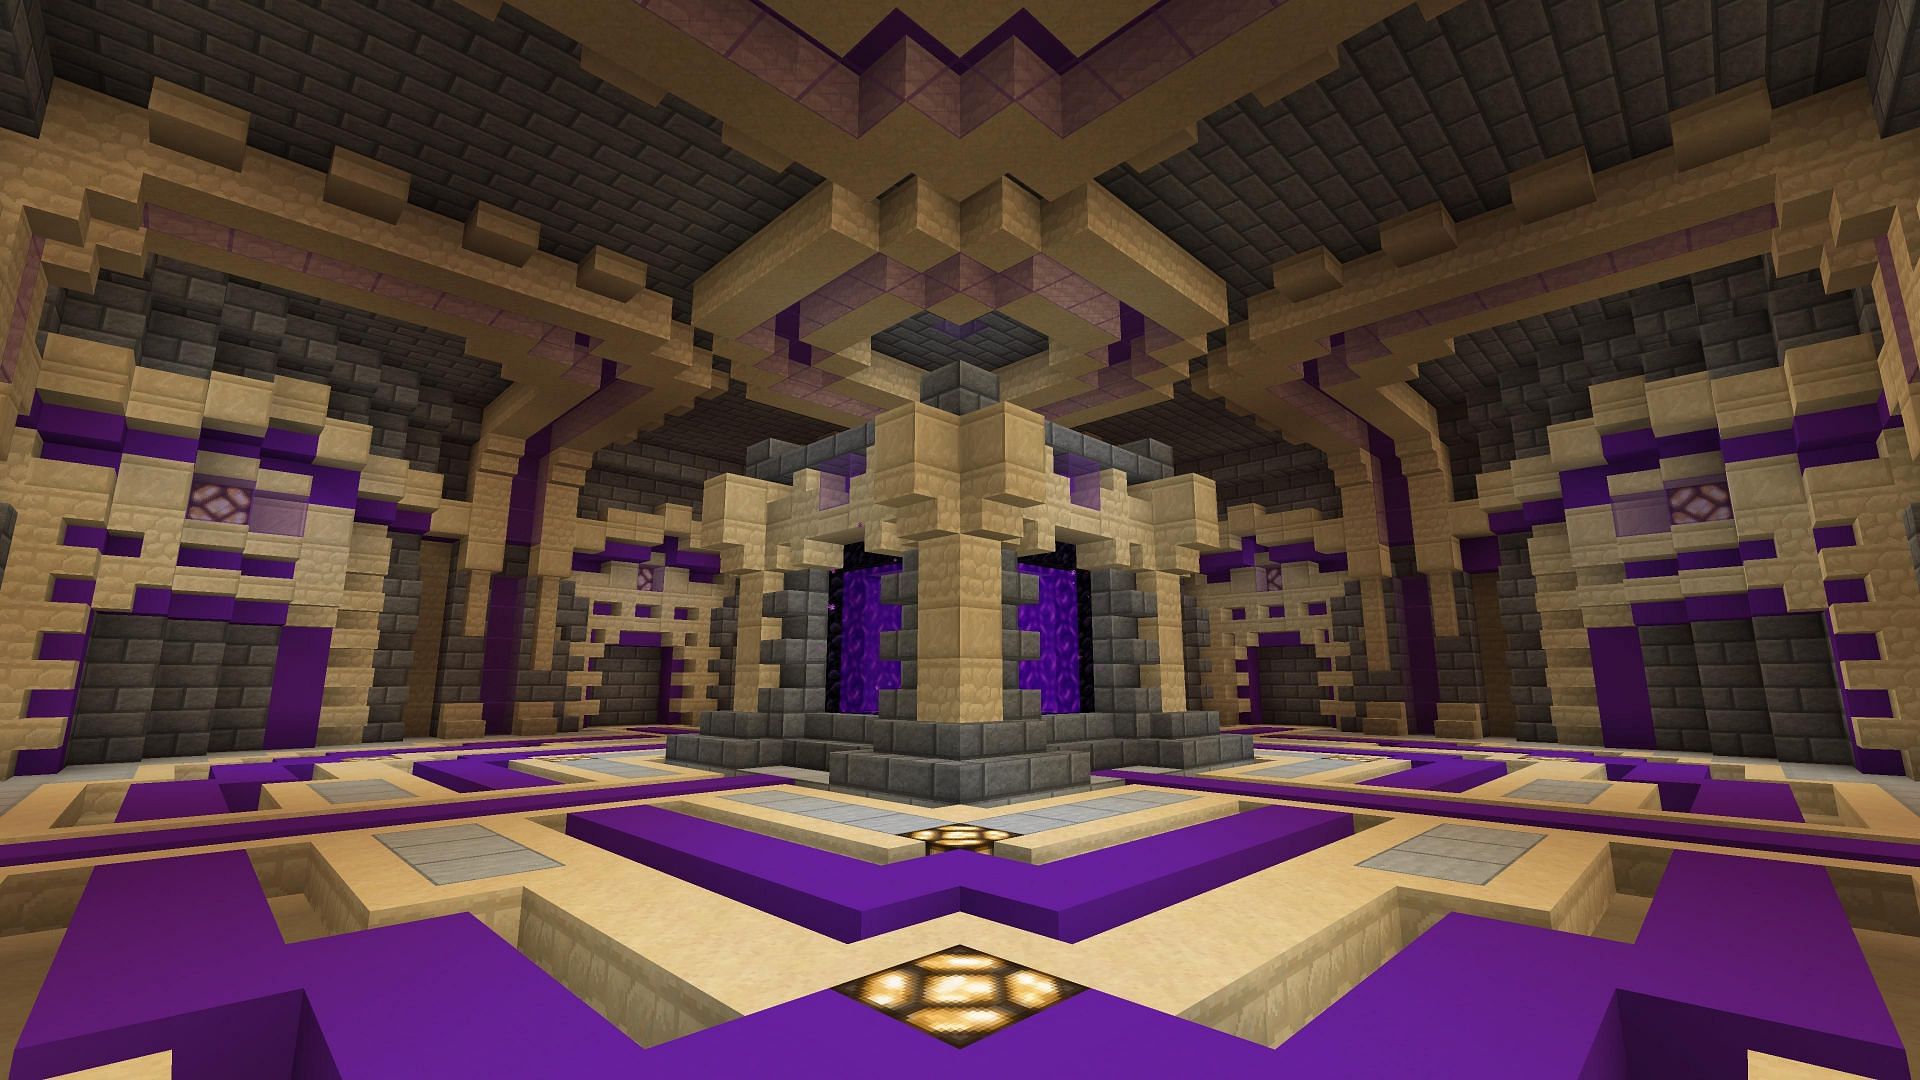 An example of a Nether hub in Minecraft (Image via Reddit)